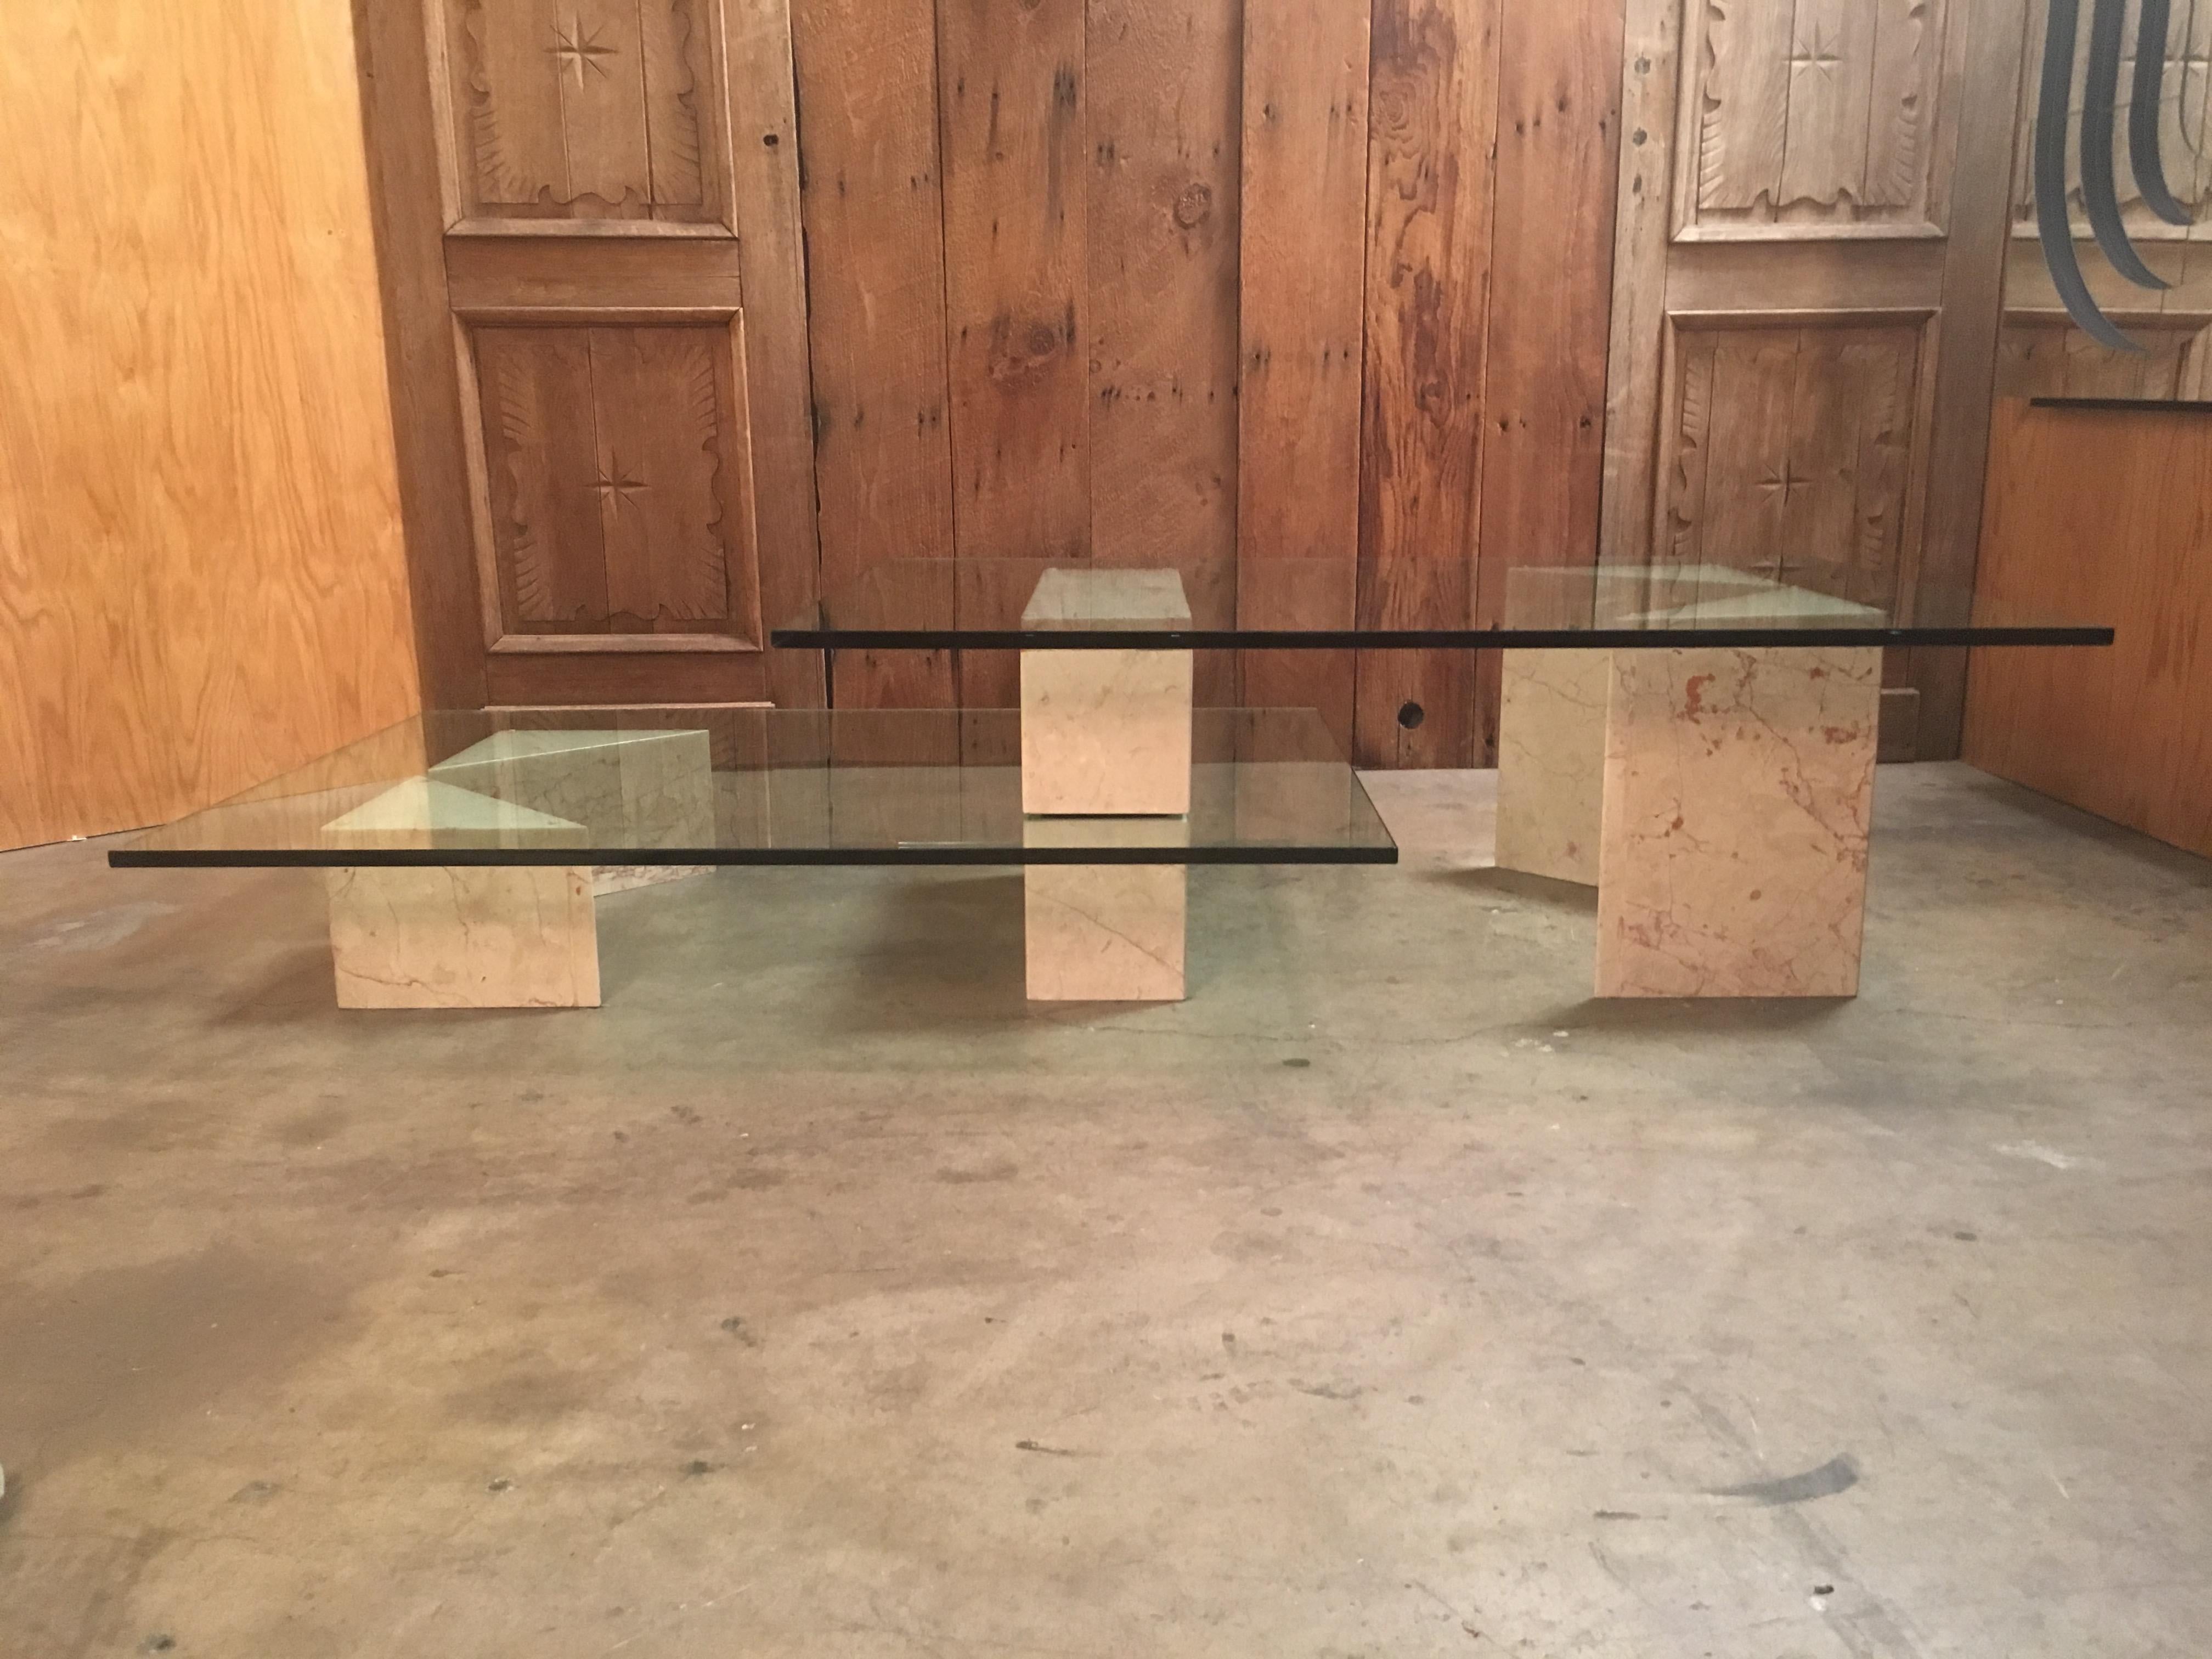 Triangle and rectangle shaped marble that stack to create a multi-level glass platforms